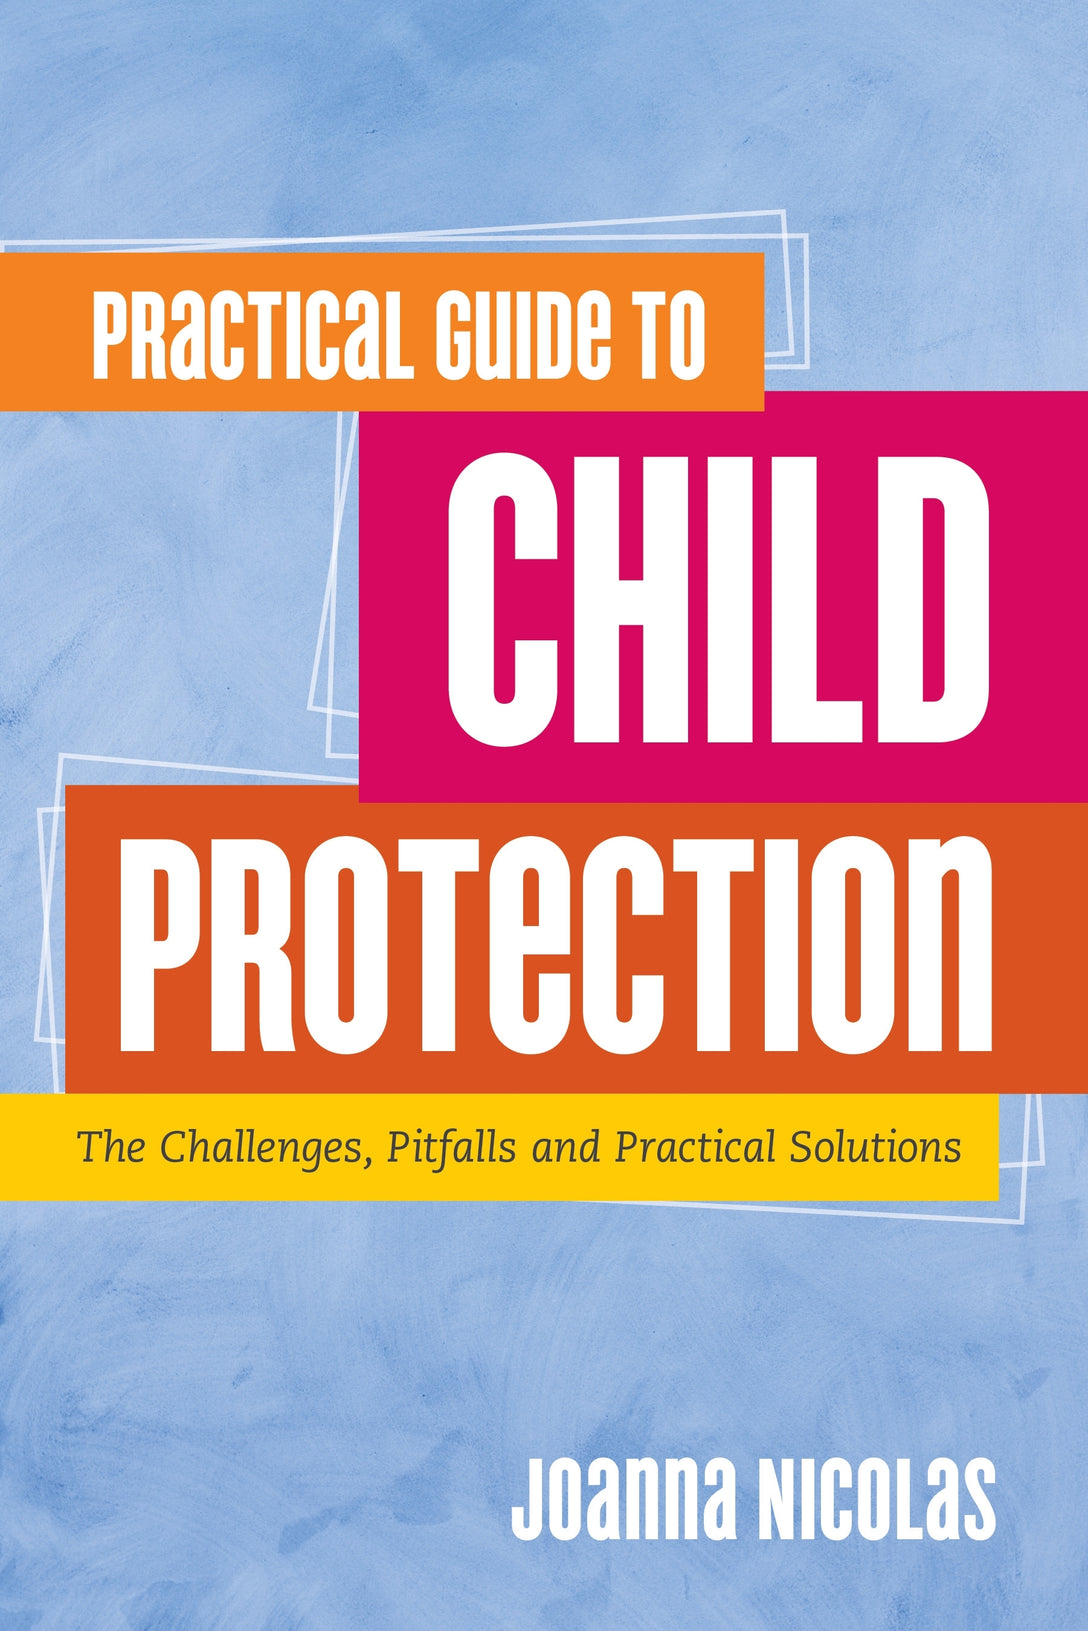 Practical Guide to Child Protection by Joanna Nicolas